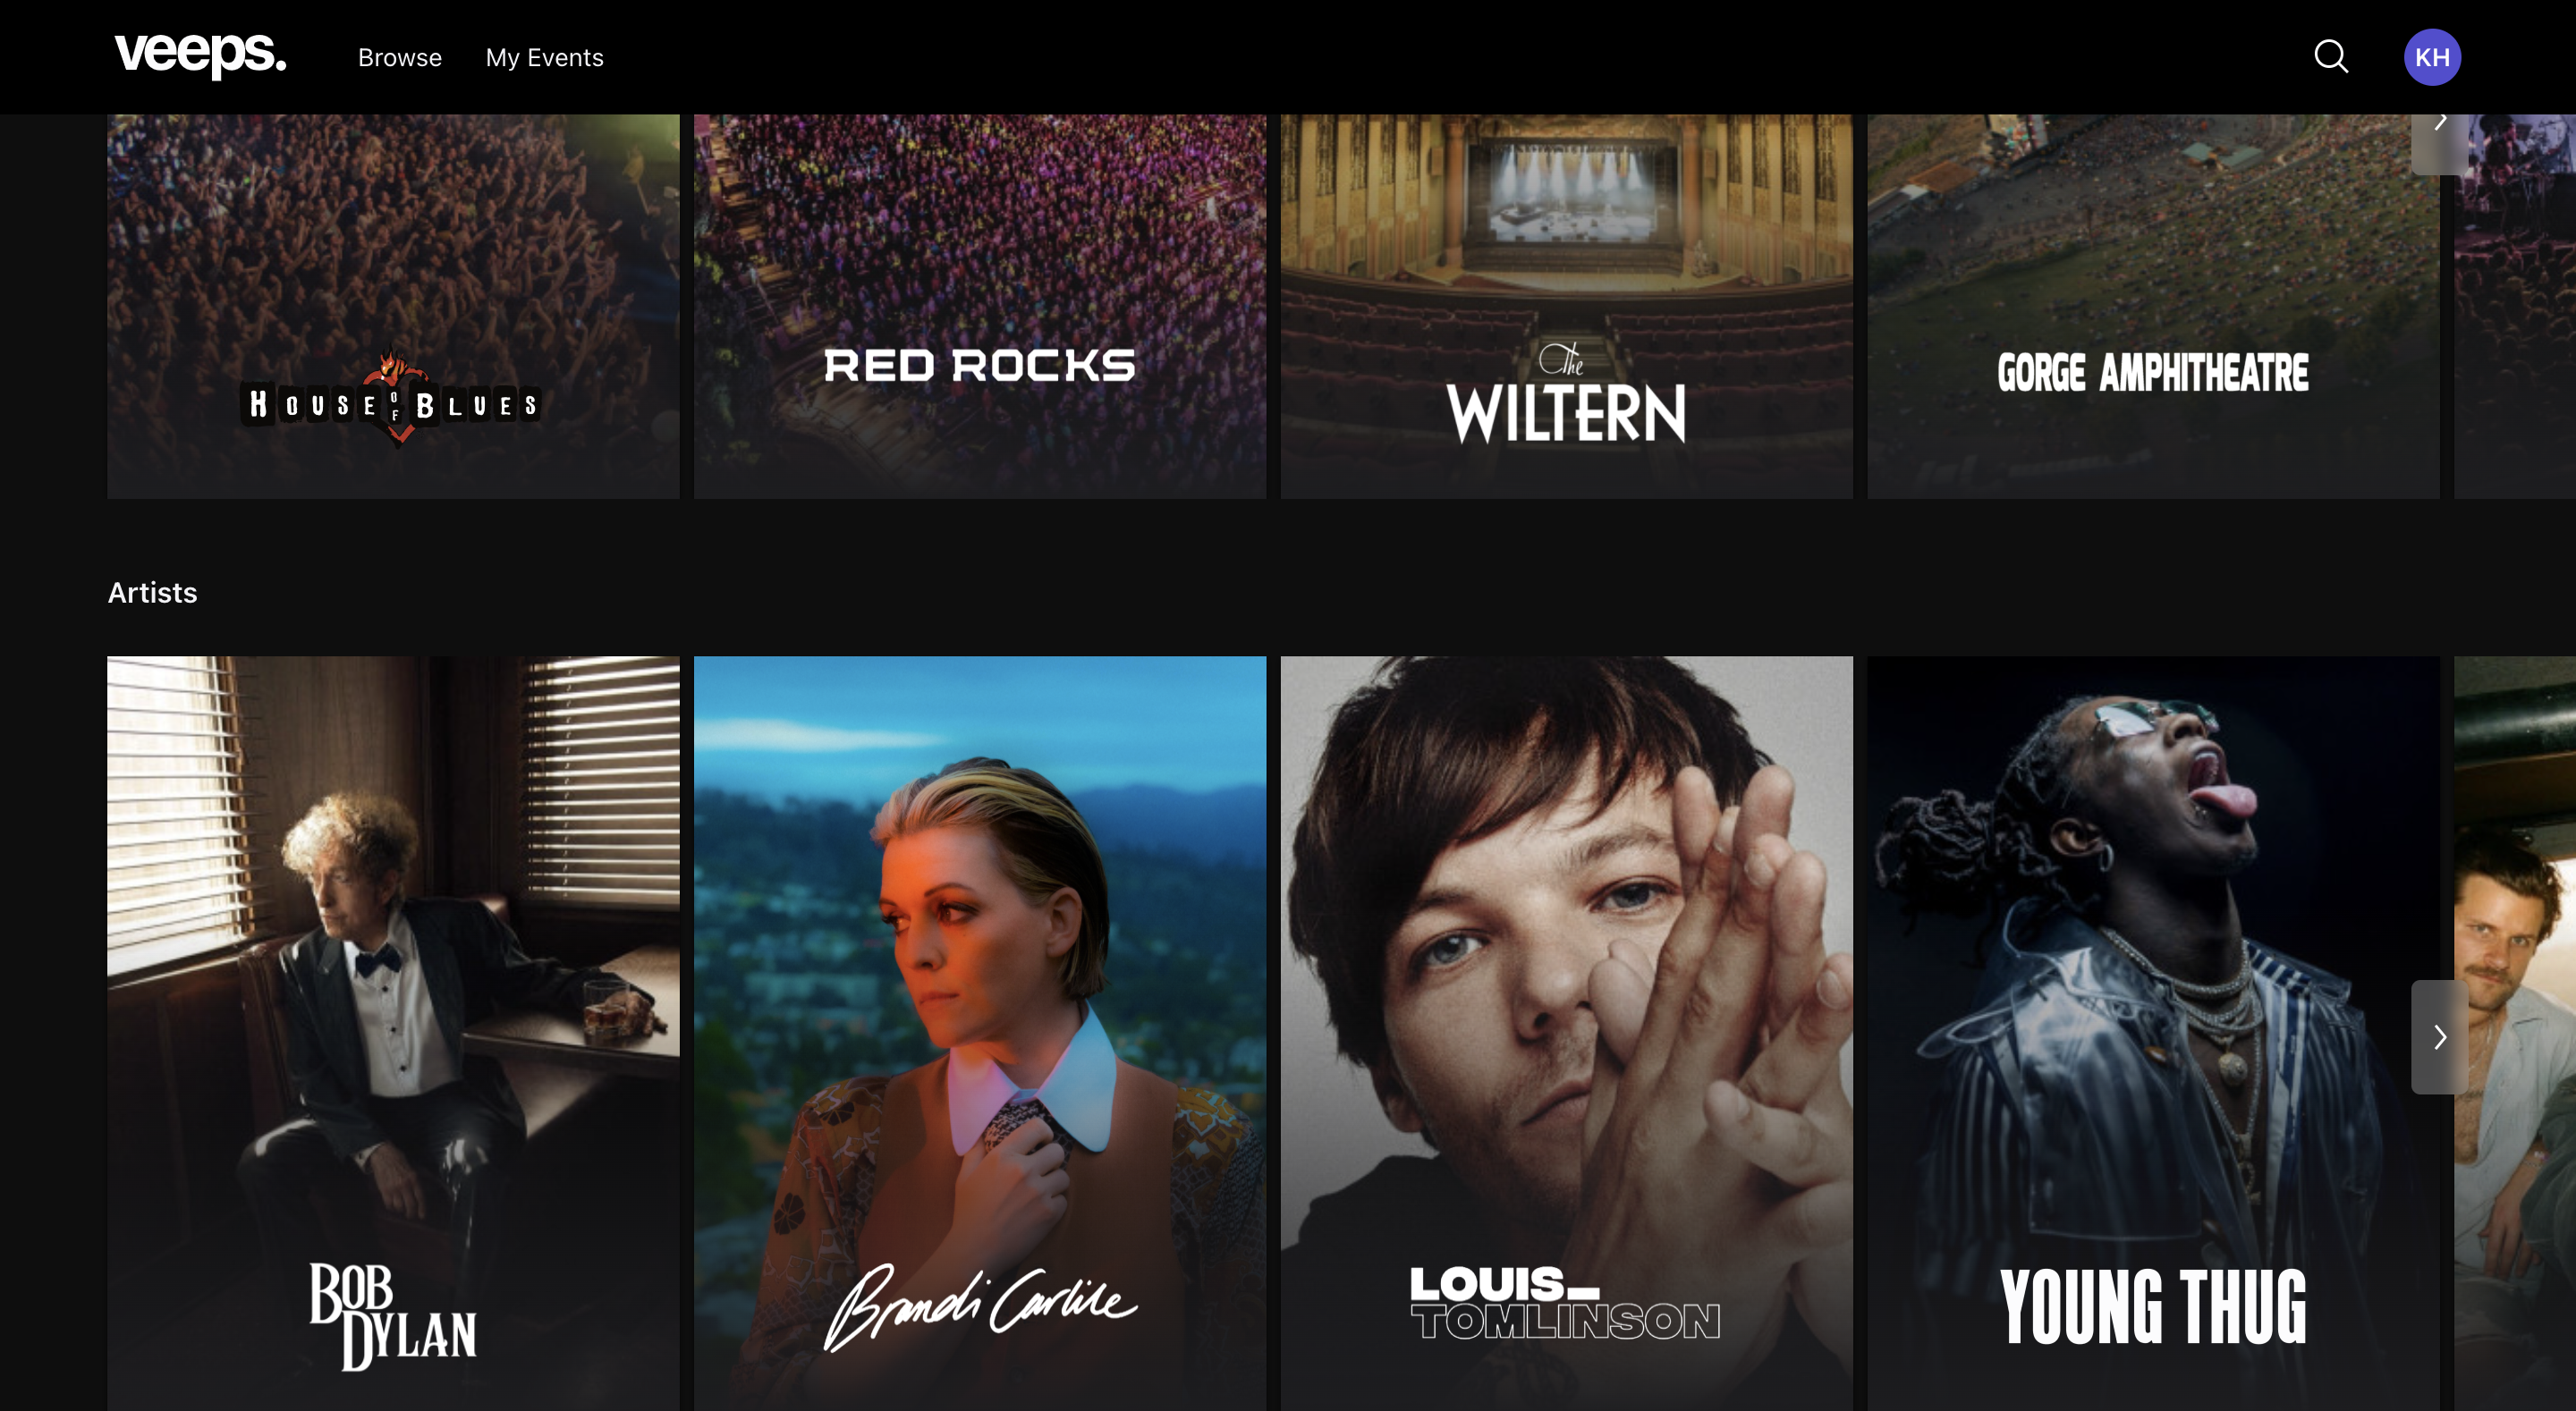 Veeps UI showing venues on the platform, including House of Blues, Red Rocks, The Wiltern, and Gorge Amphitheatre. The UI also shows artists, including Bob Dylan, Brandi Carlile, Louis-Tomlinson, and Young Thug.